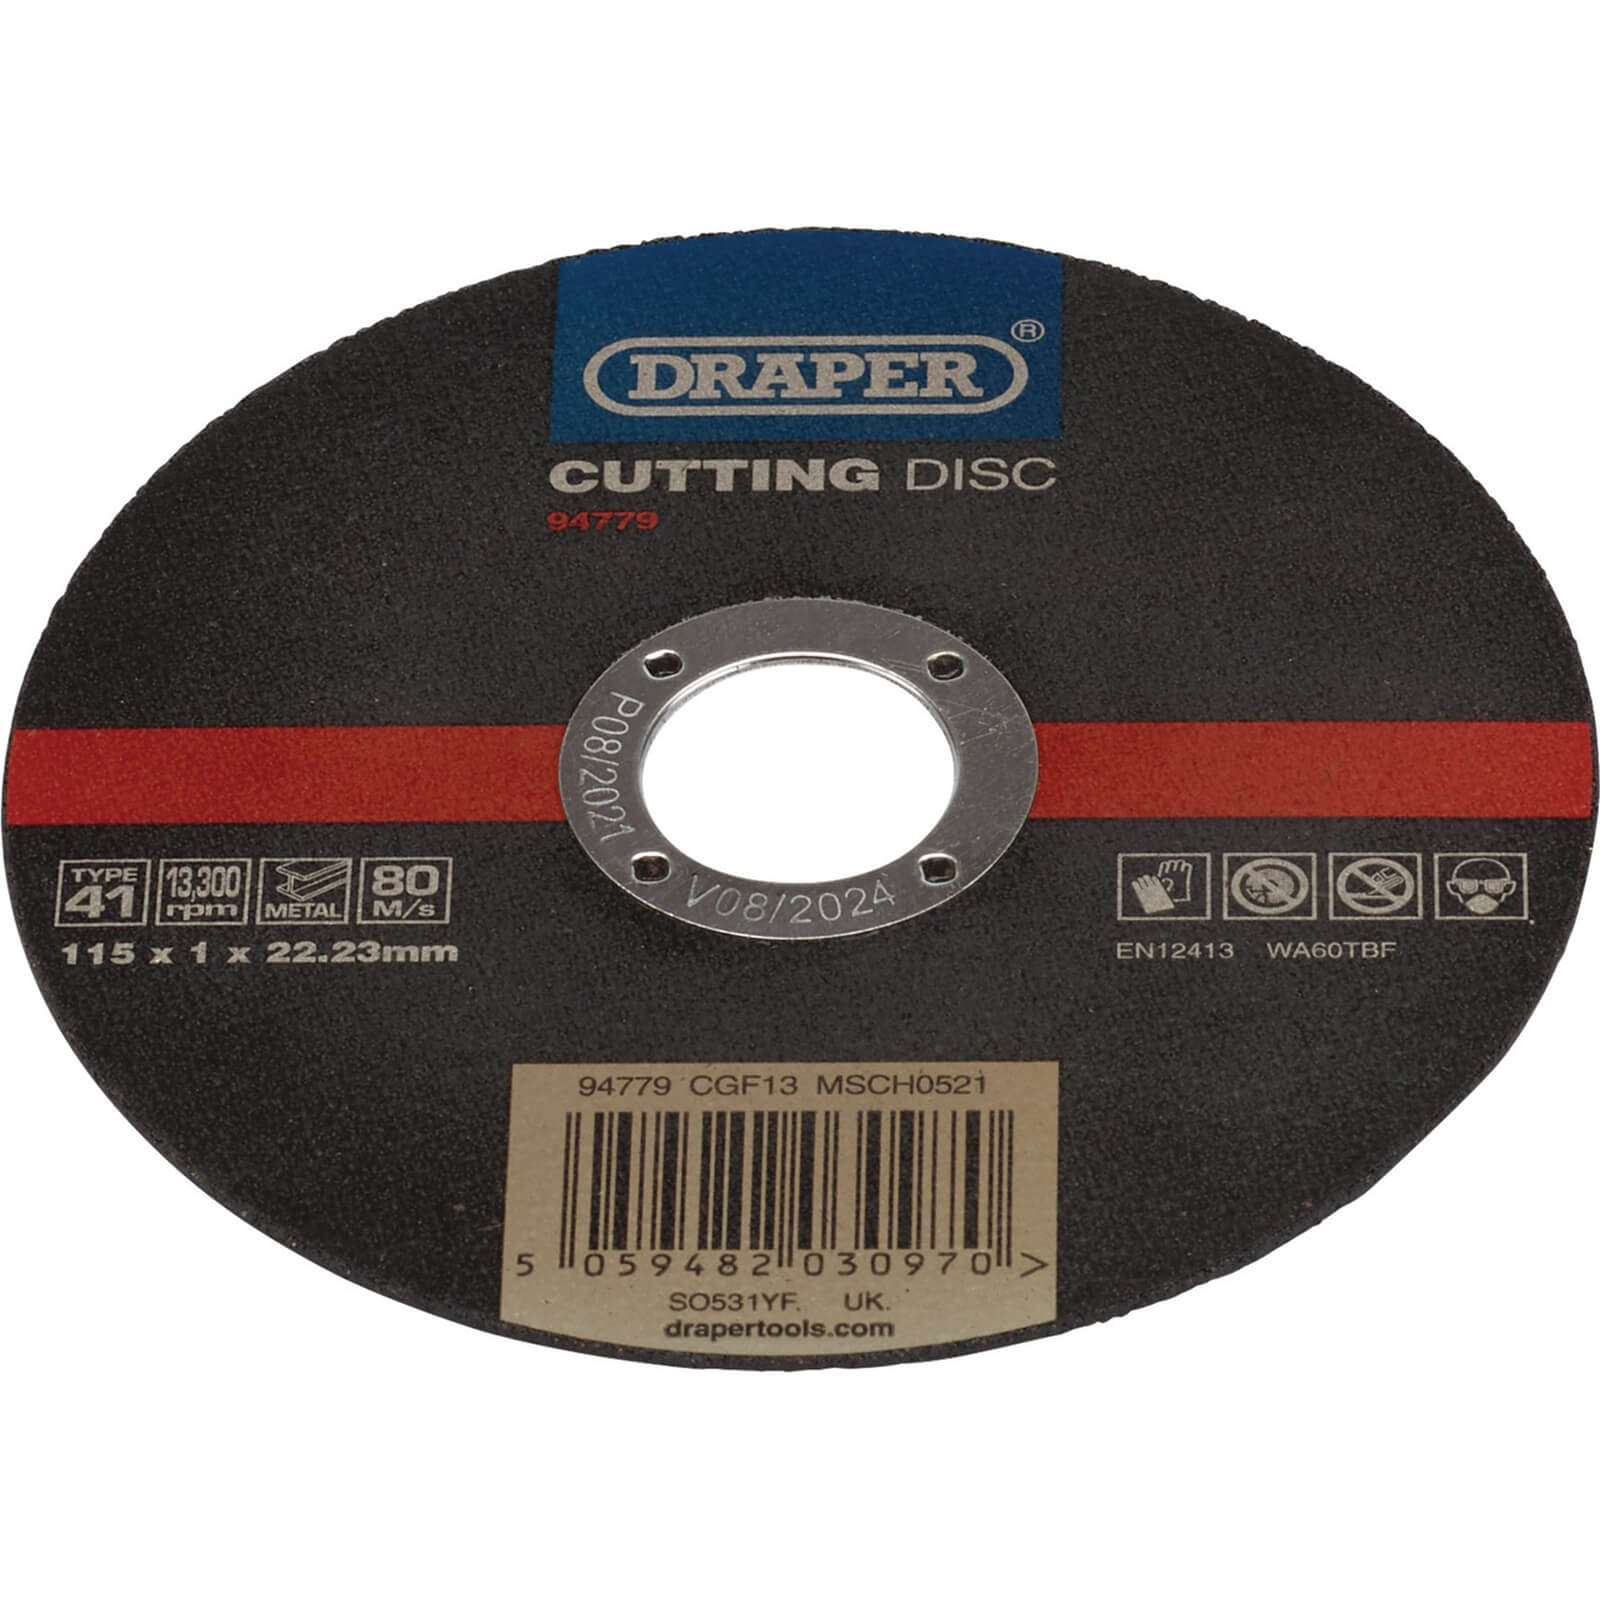 Photos - Cutting Disc Draper Stainless Steel and Inox Metal  115mm 1mm 22mm 94779 